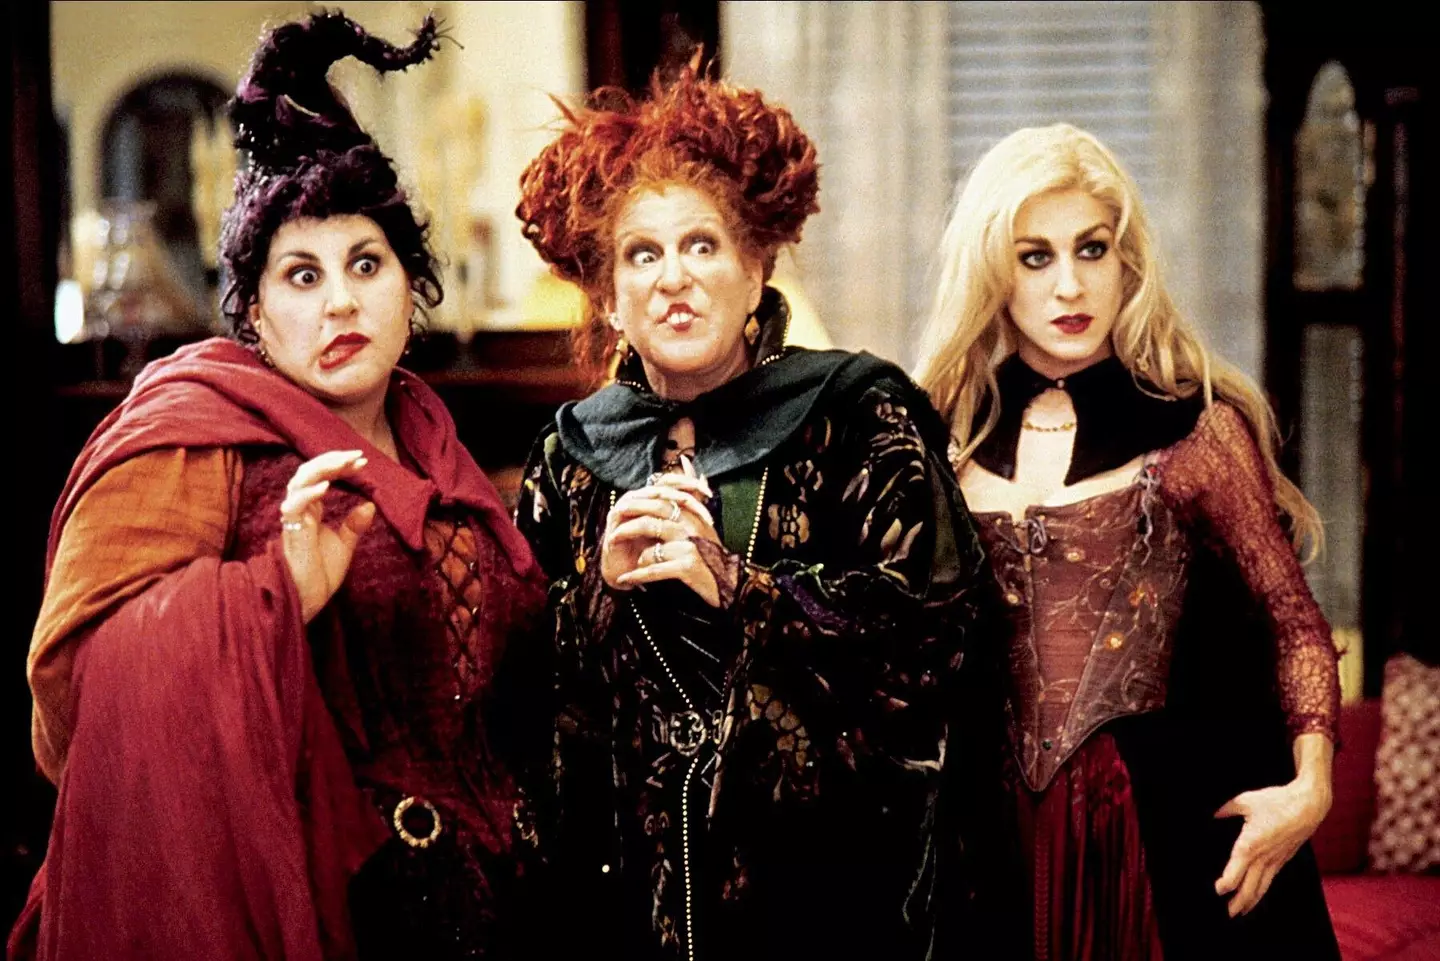 Hocus Pocus 2 will be available to stream on Disney+ on 30 September.